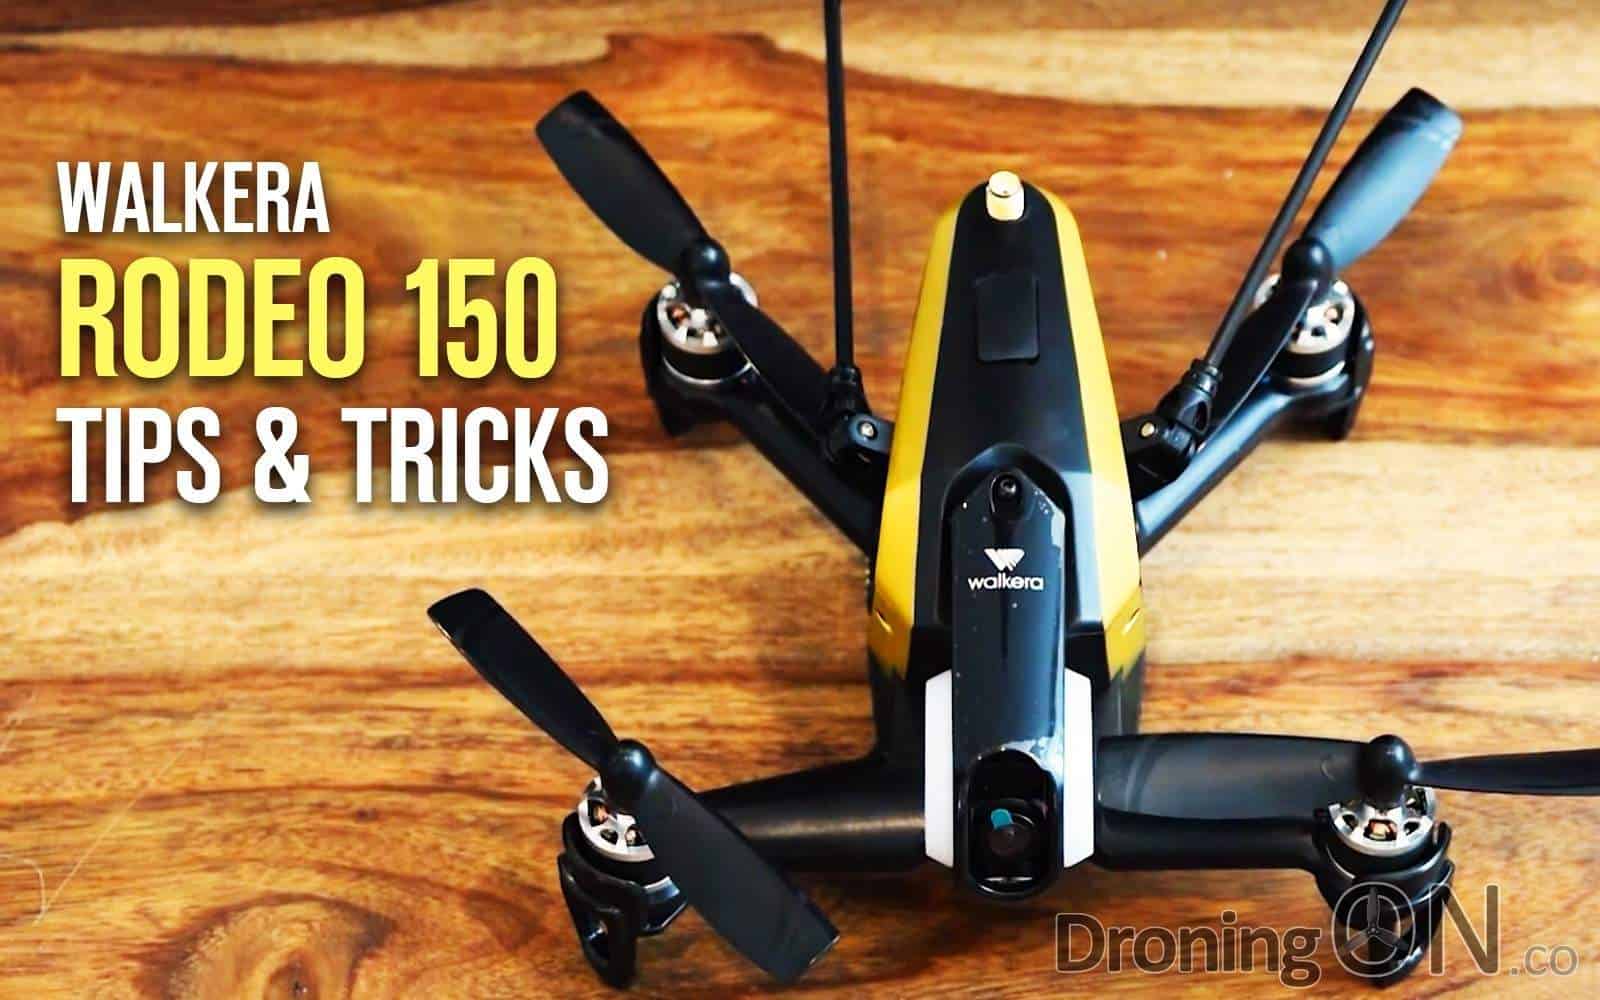 Rodeo 150 Tips, Tricks Guide DroningON